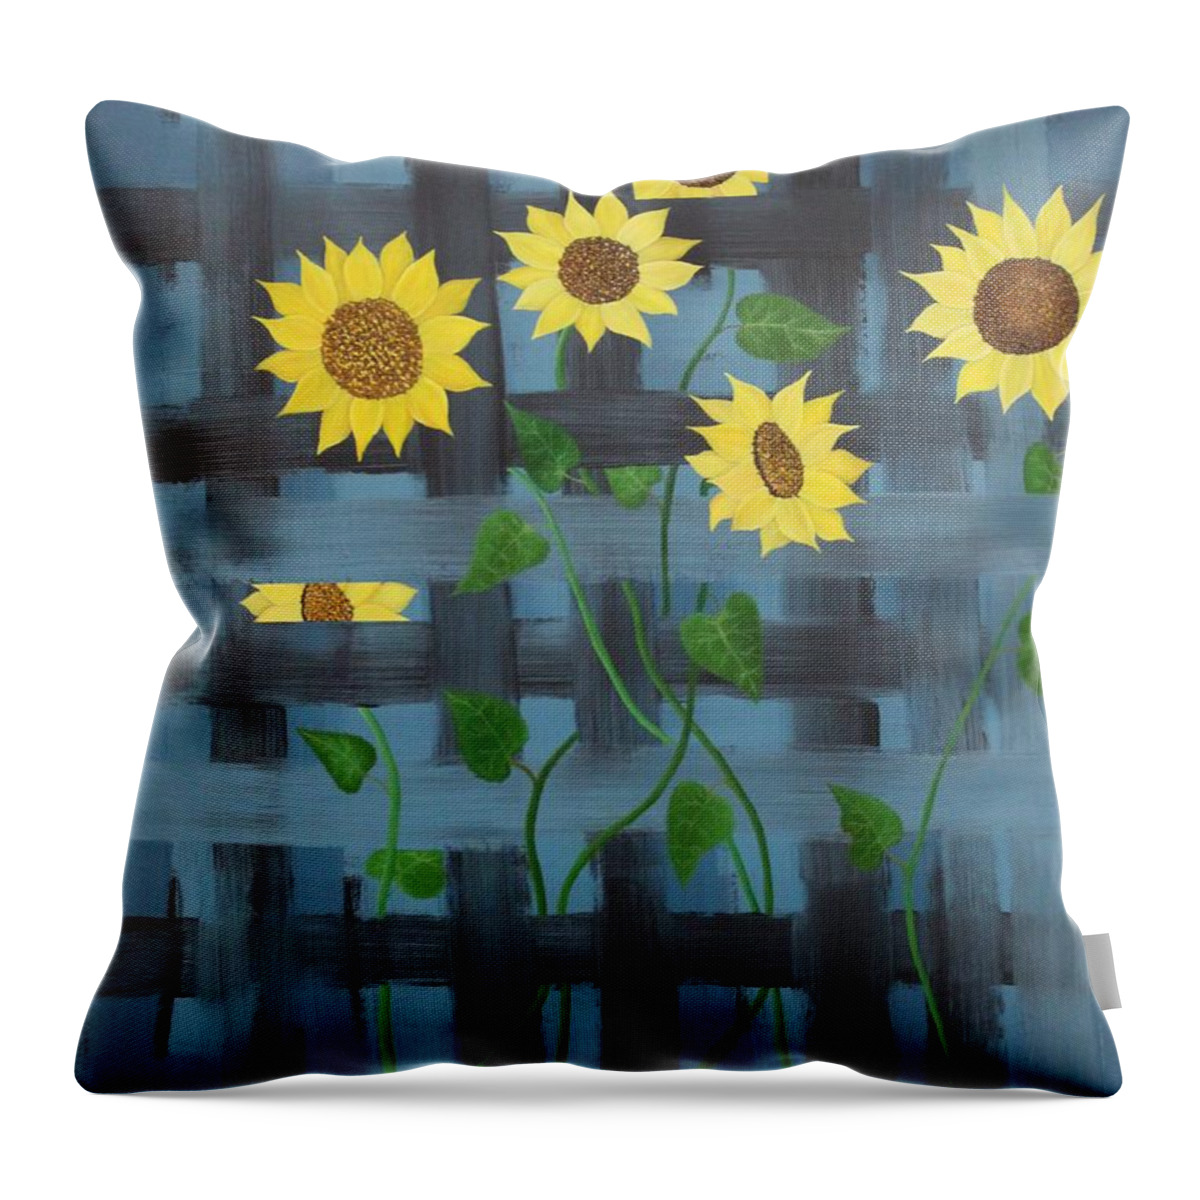 Sunflowers Throw Pillow featuring the painting Lattice by Berlynn